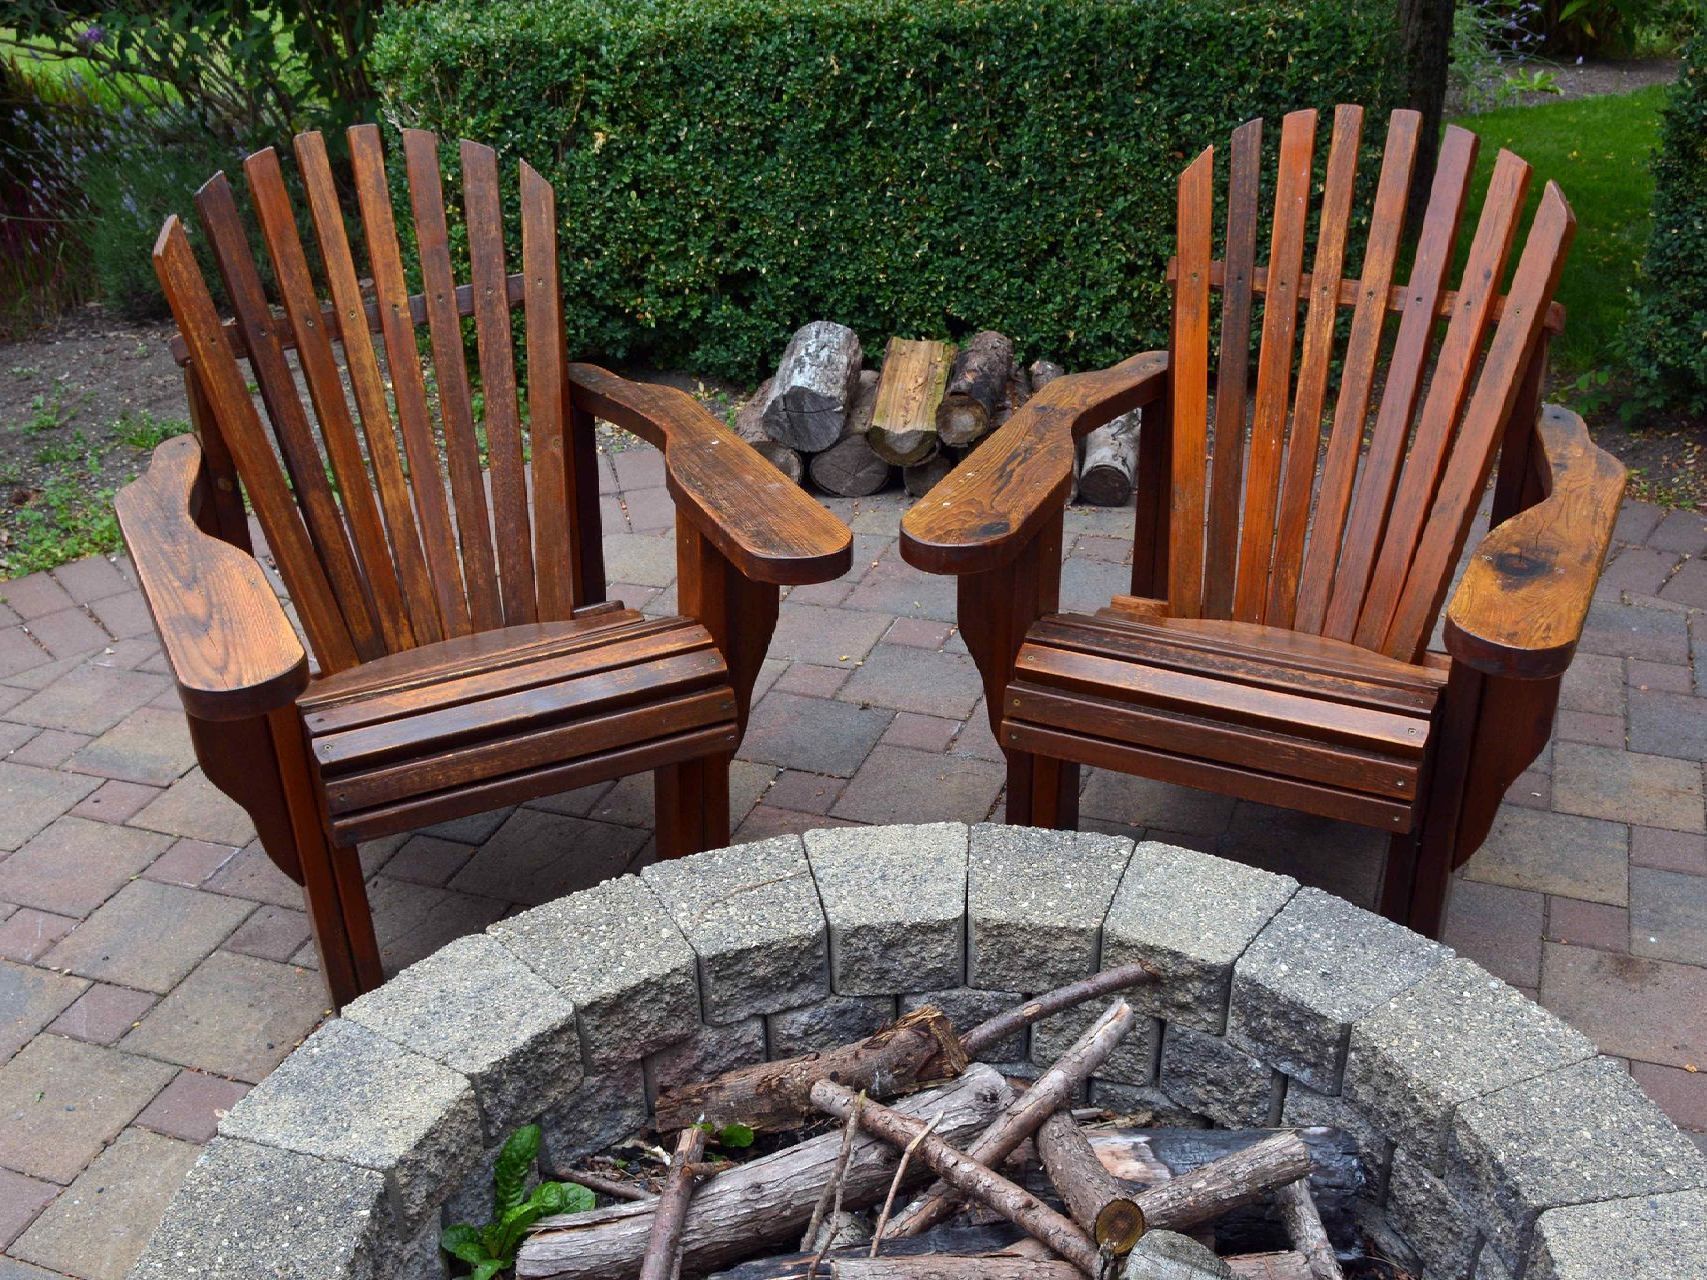 Two empty brown chairs in front of a gray rounded fire pit